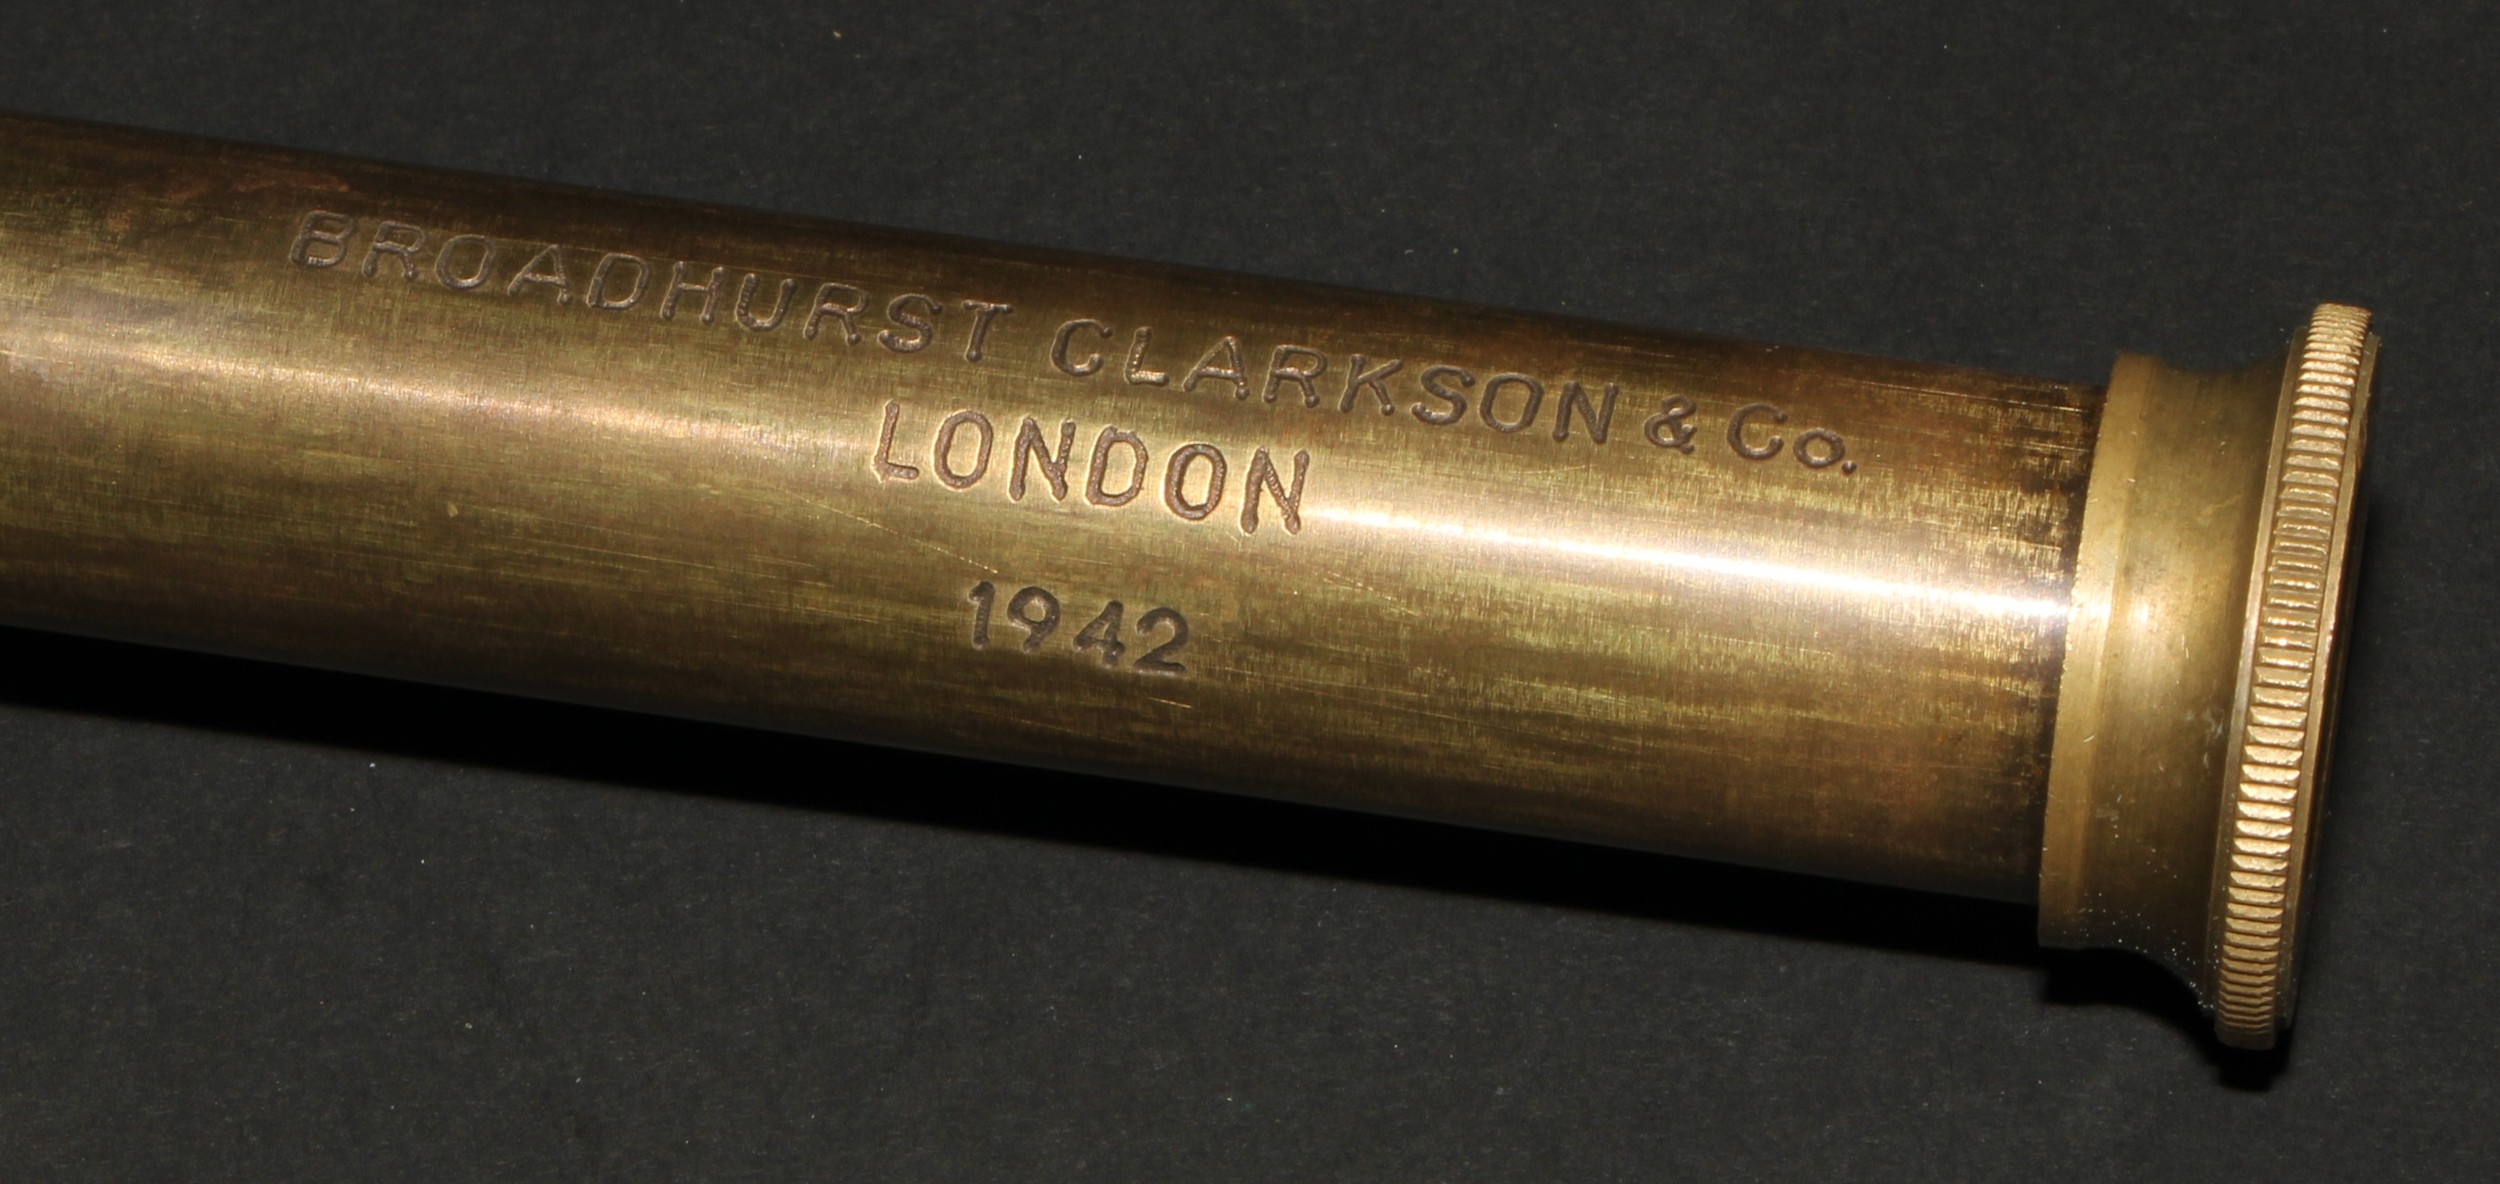 A brass three-draw telescope, inscribed Broadhurst Clarkson & Co, London 1942, 28cm extending to - Image 2 of 4